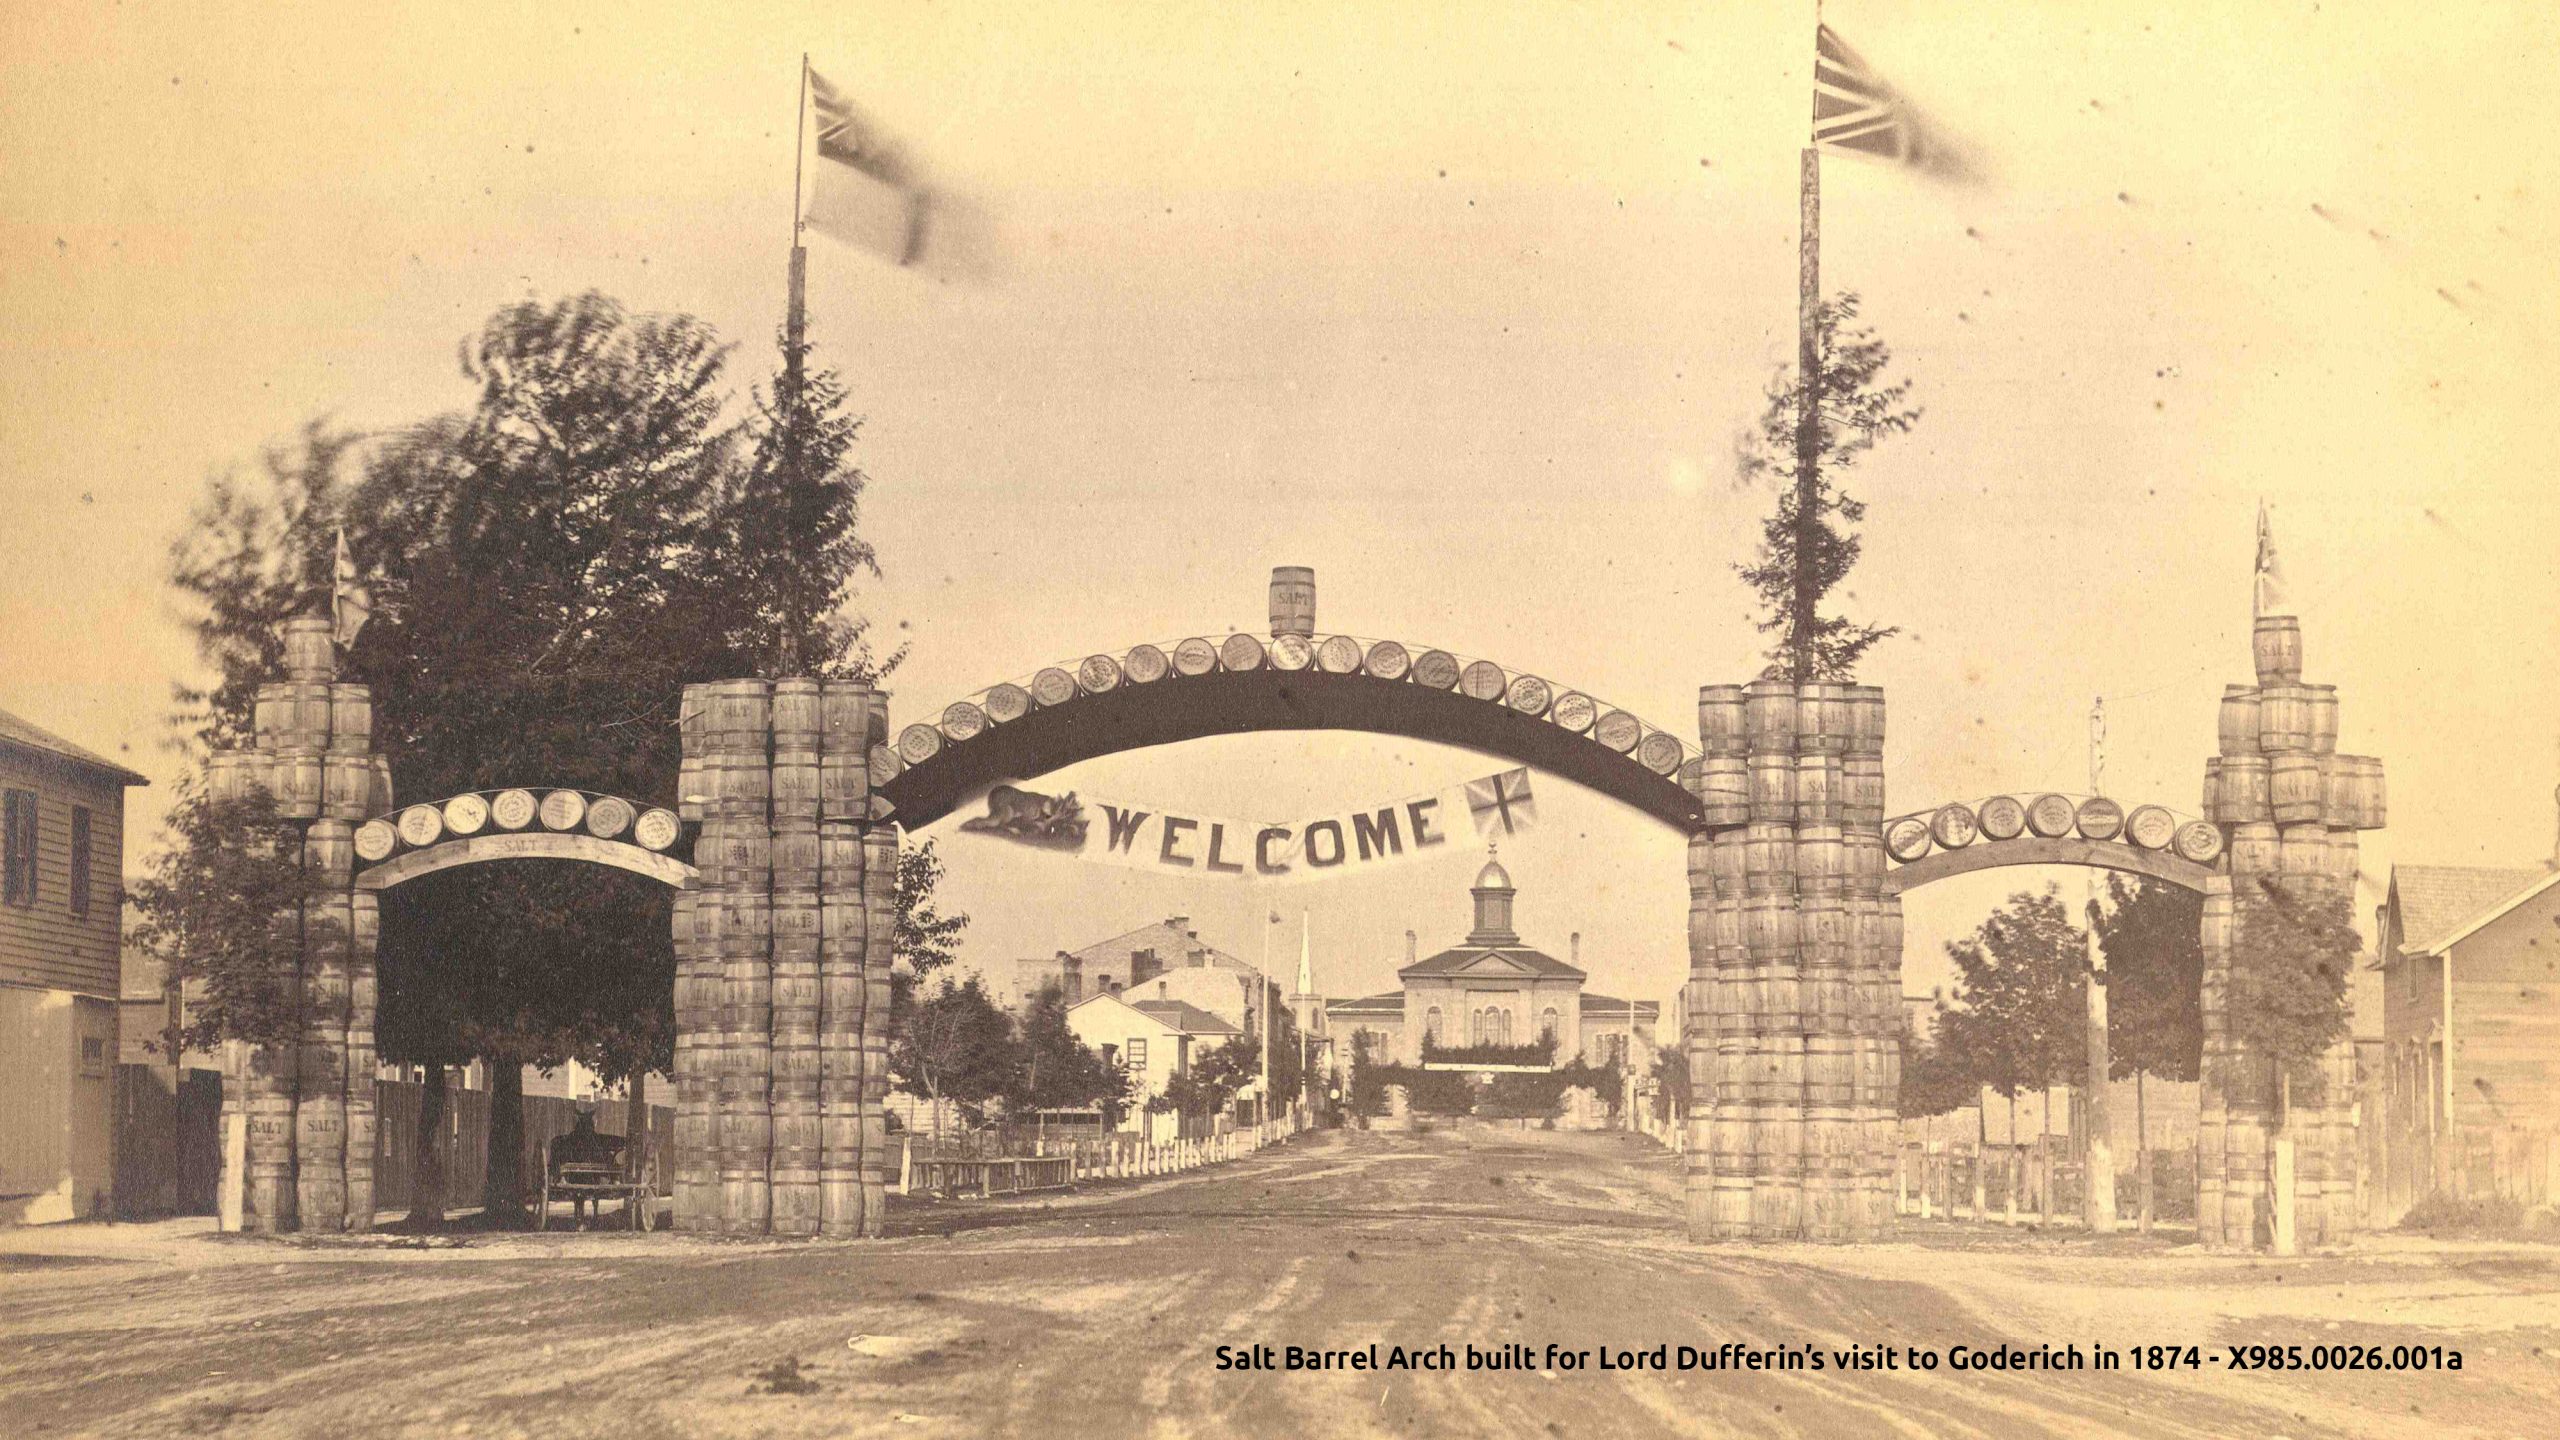 Historic image of salt barrels in an arch welcoming Lord Dufferin to Goderich. The old courthouse is shown in the distance.